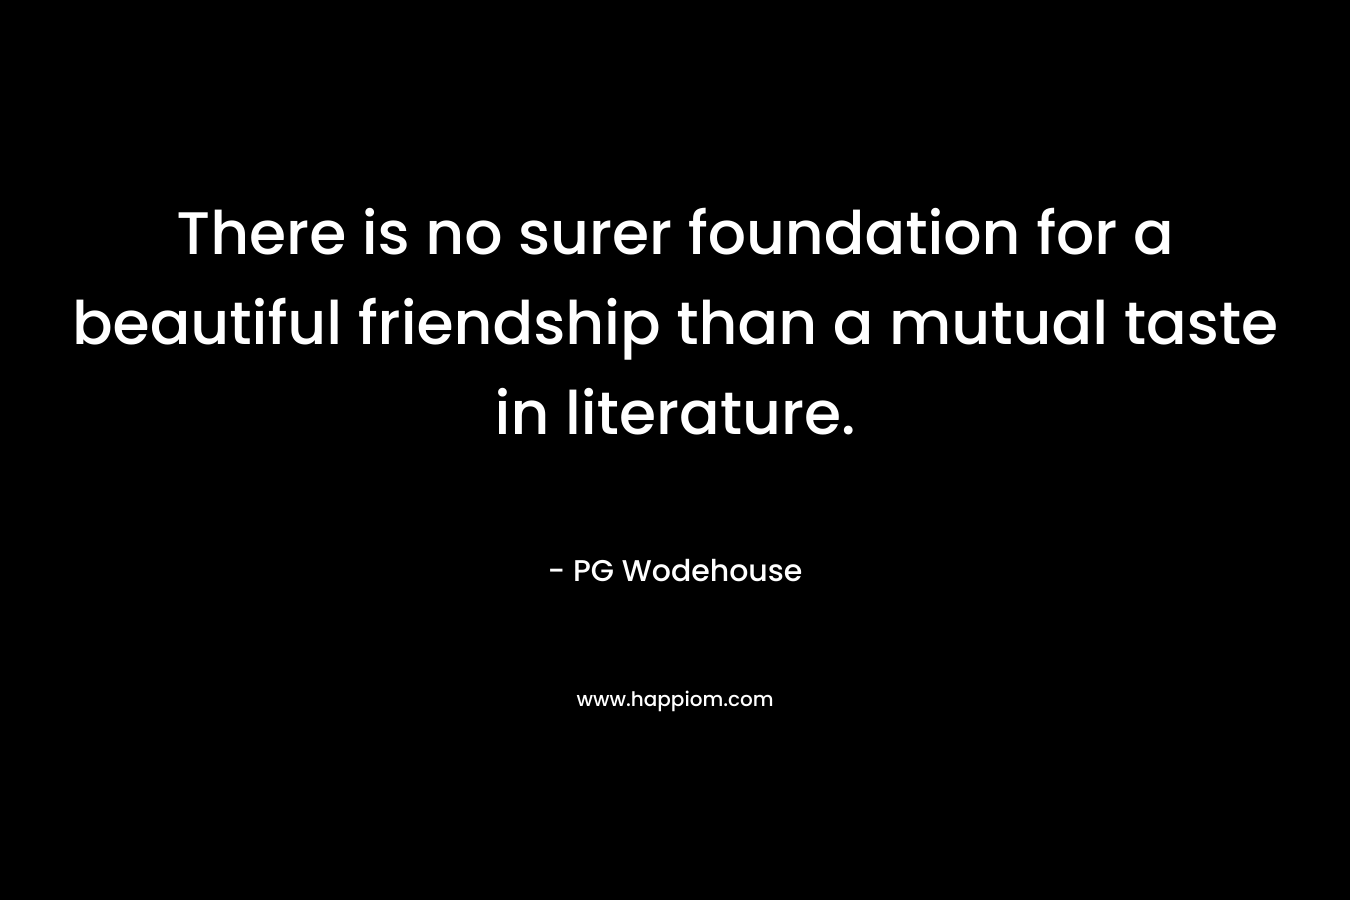 There is no surer foundation for a beautiful friendship than a mutual taste in literature. – PG Wodehouse